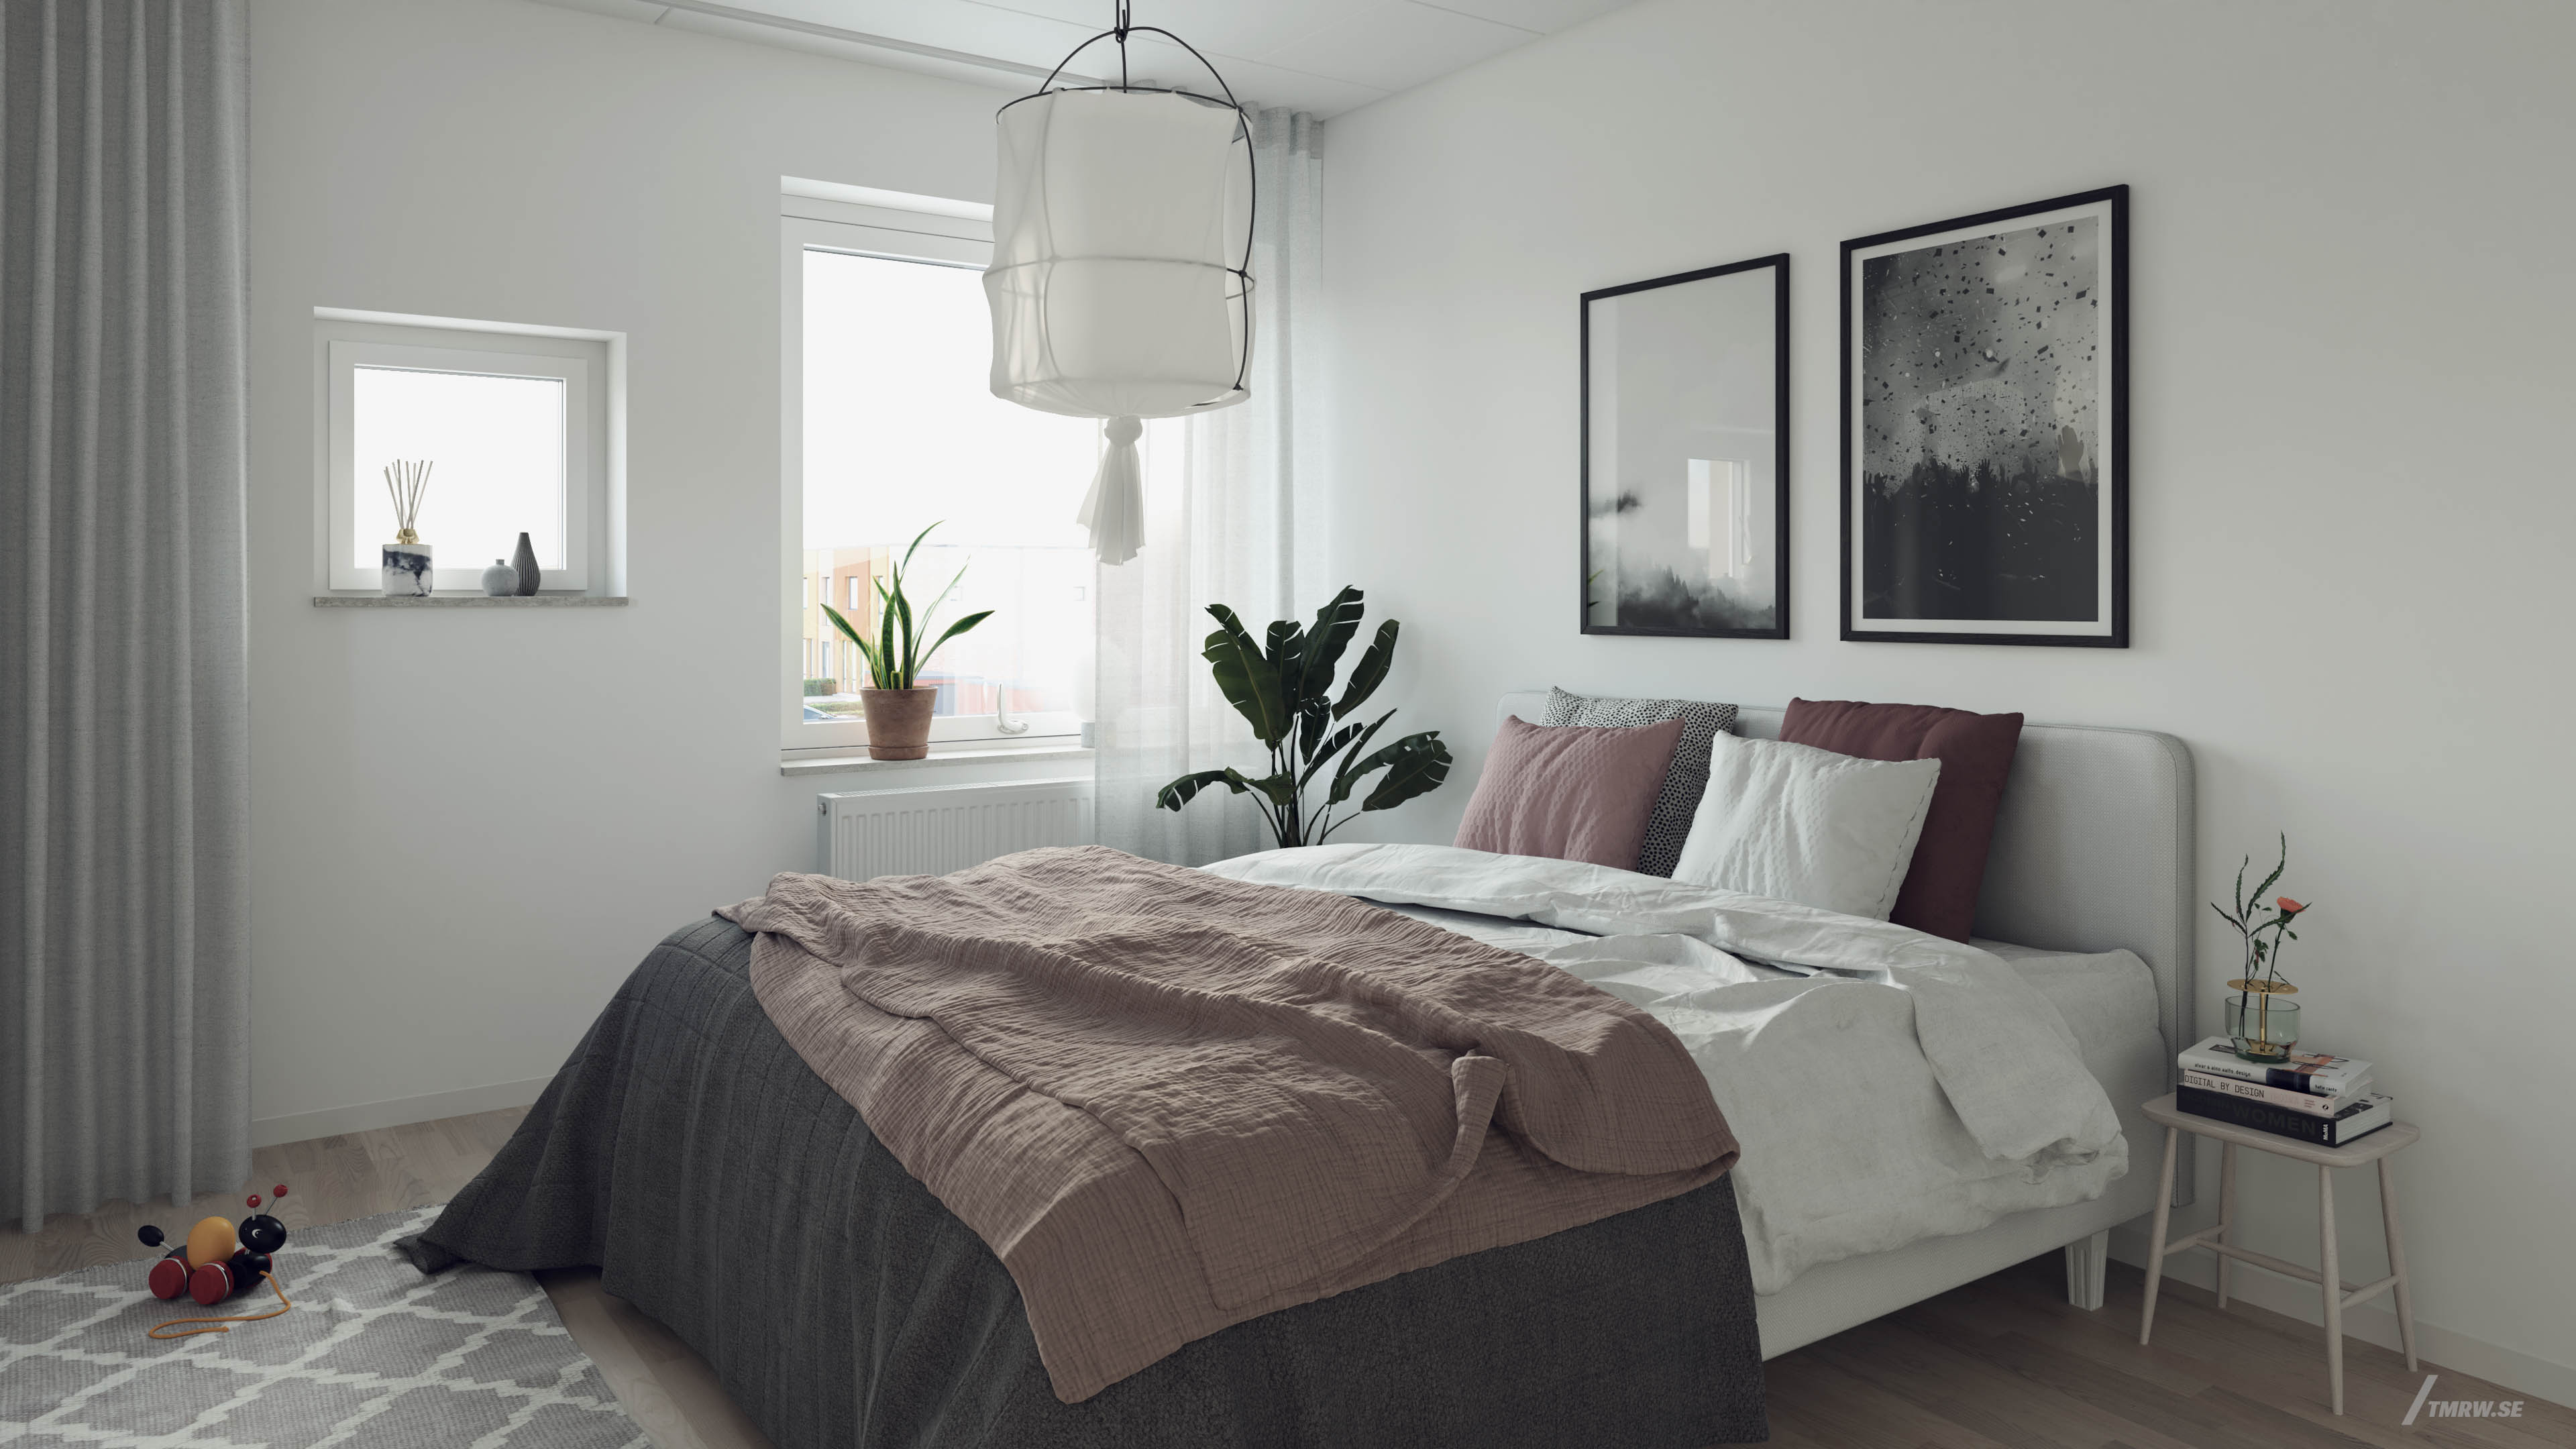 Architectural visualization of Hököpinge for Nordr, bedroom in day light from a interior view